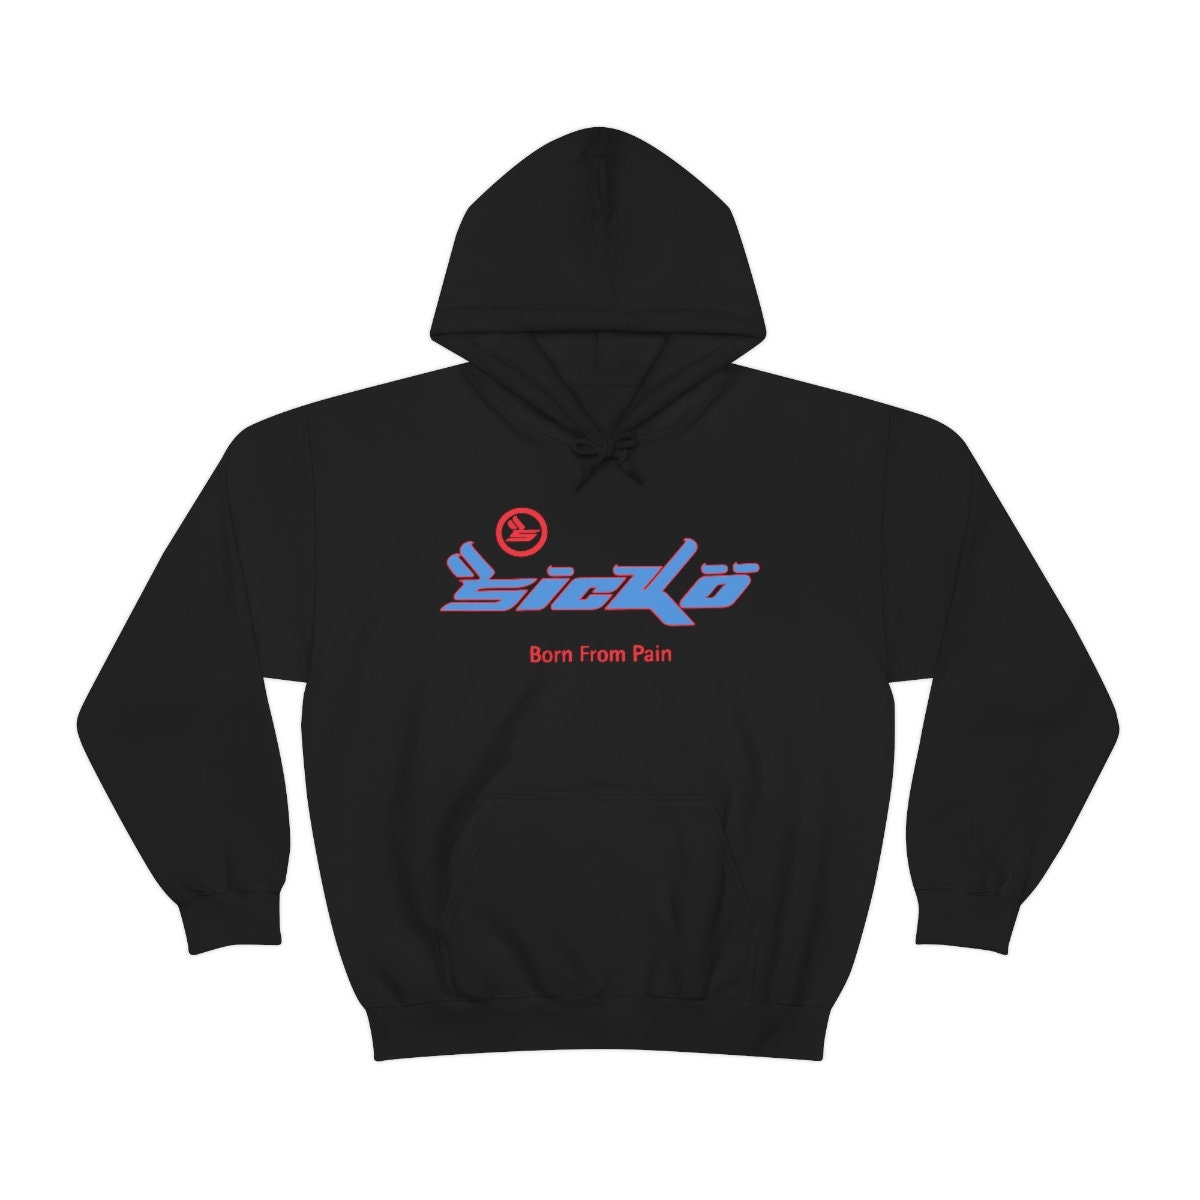 Sicko Born From Pain Hoodies All Colors and Sizes - Etsy